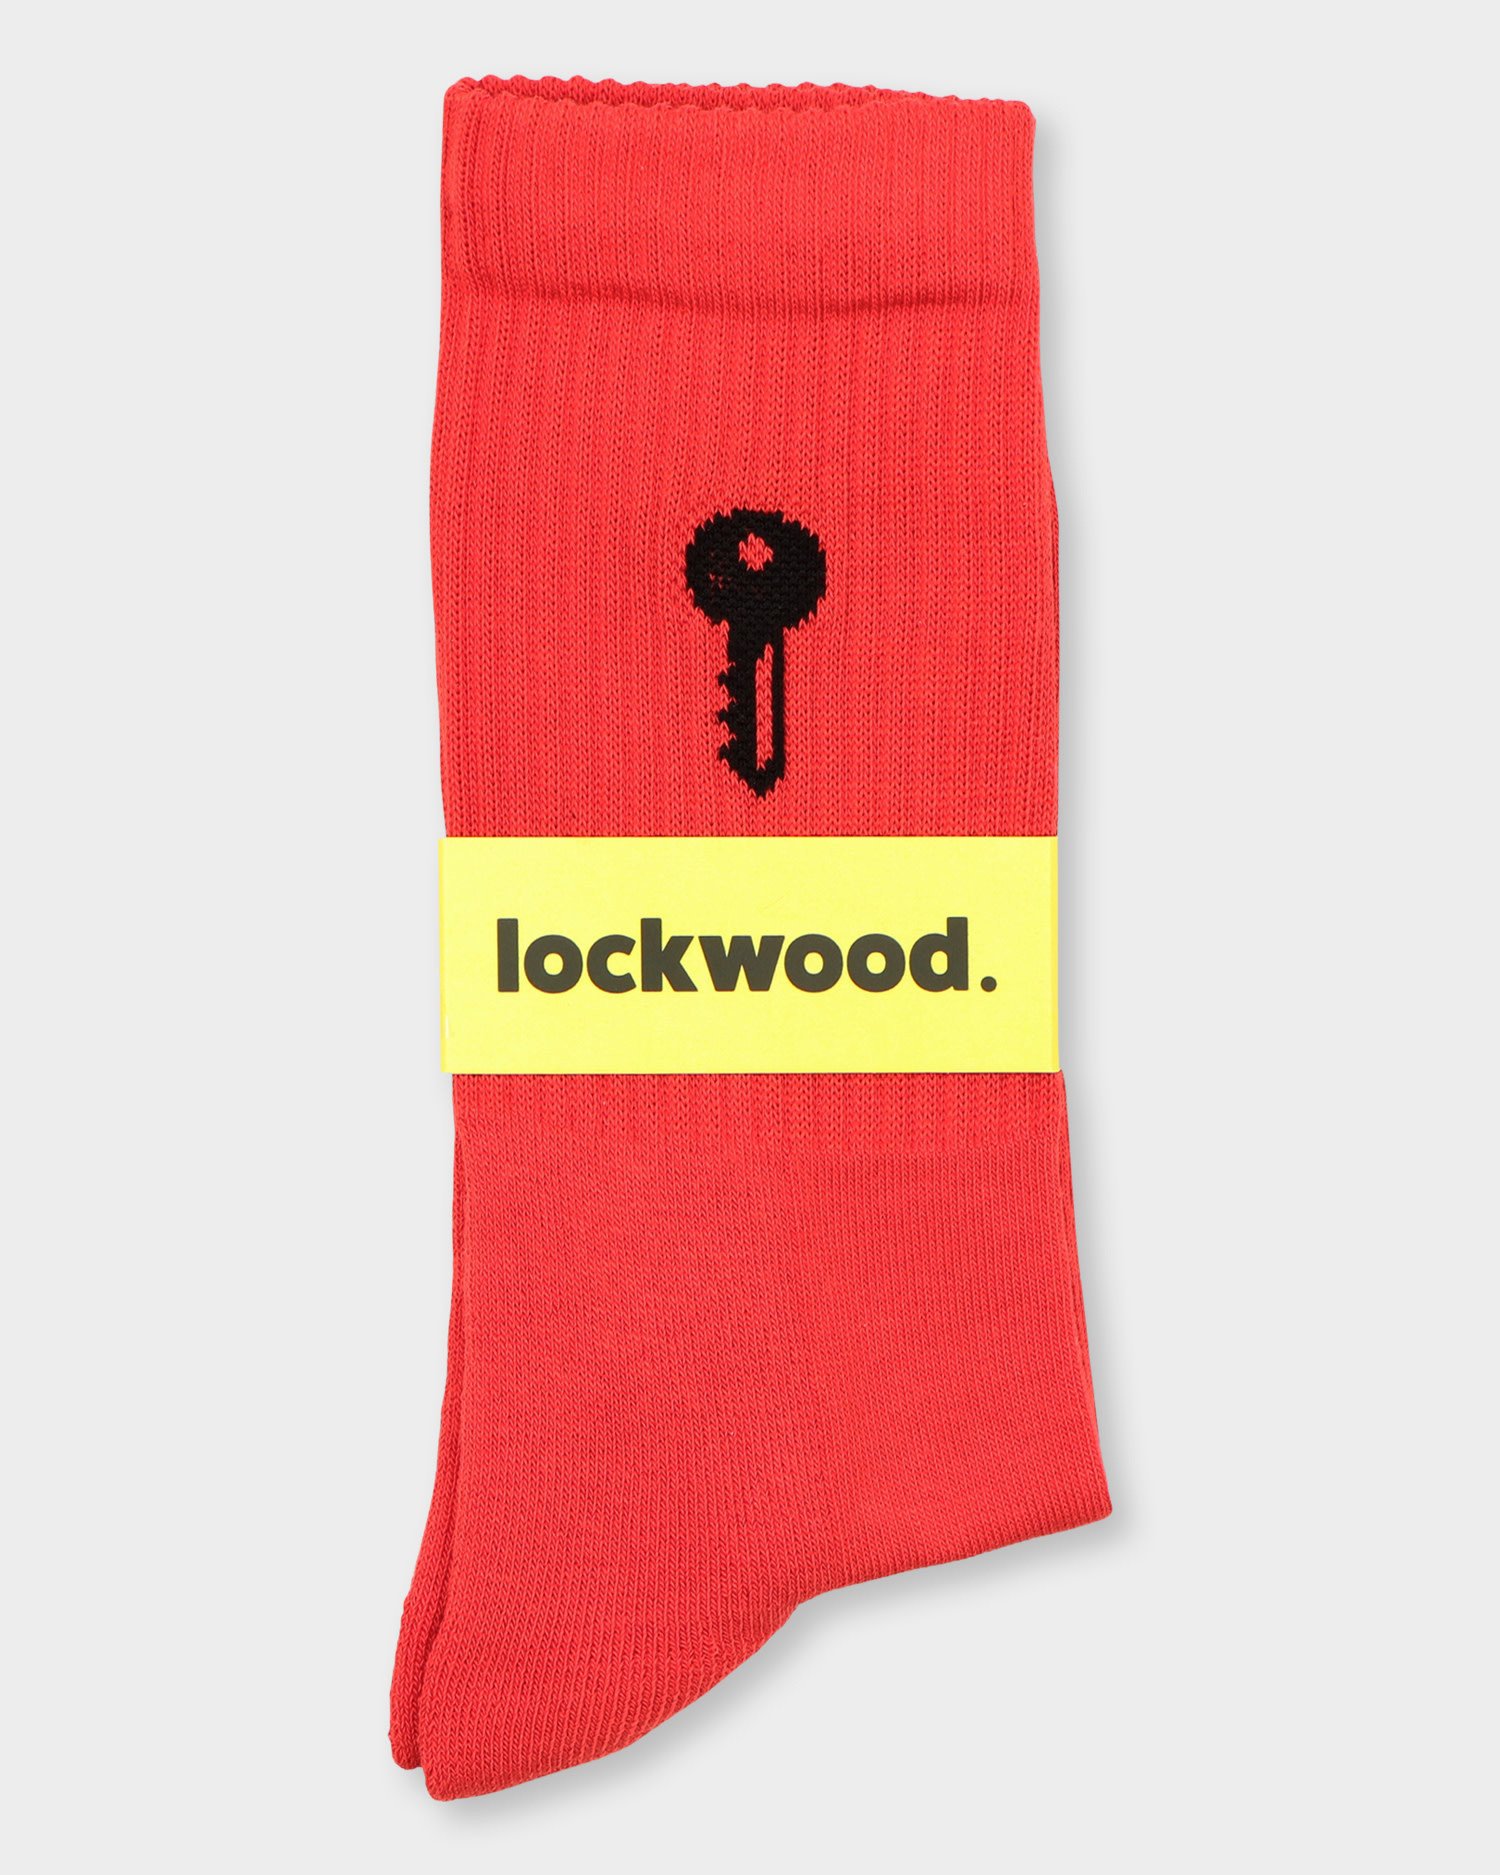 Lockwood For daily Use Socks Hot Coral